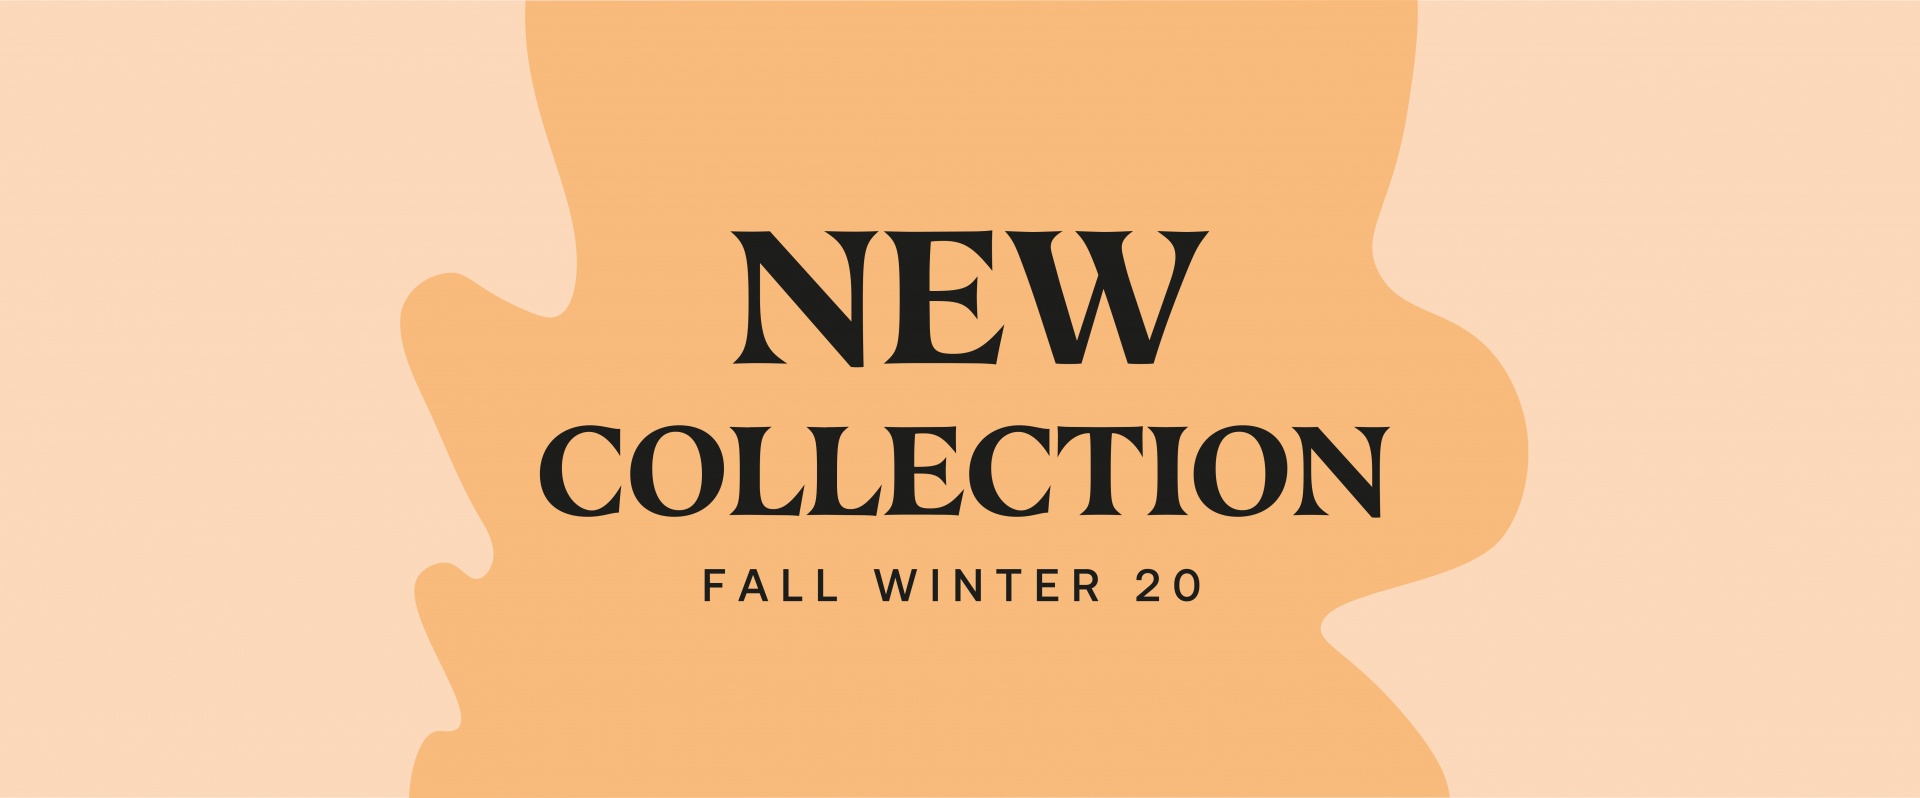 New Collection FW20